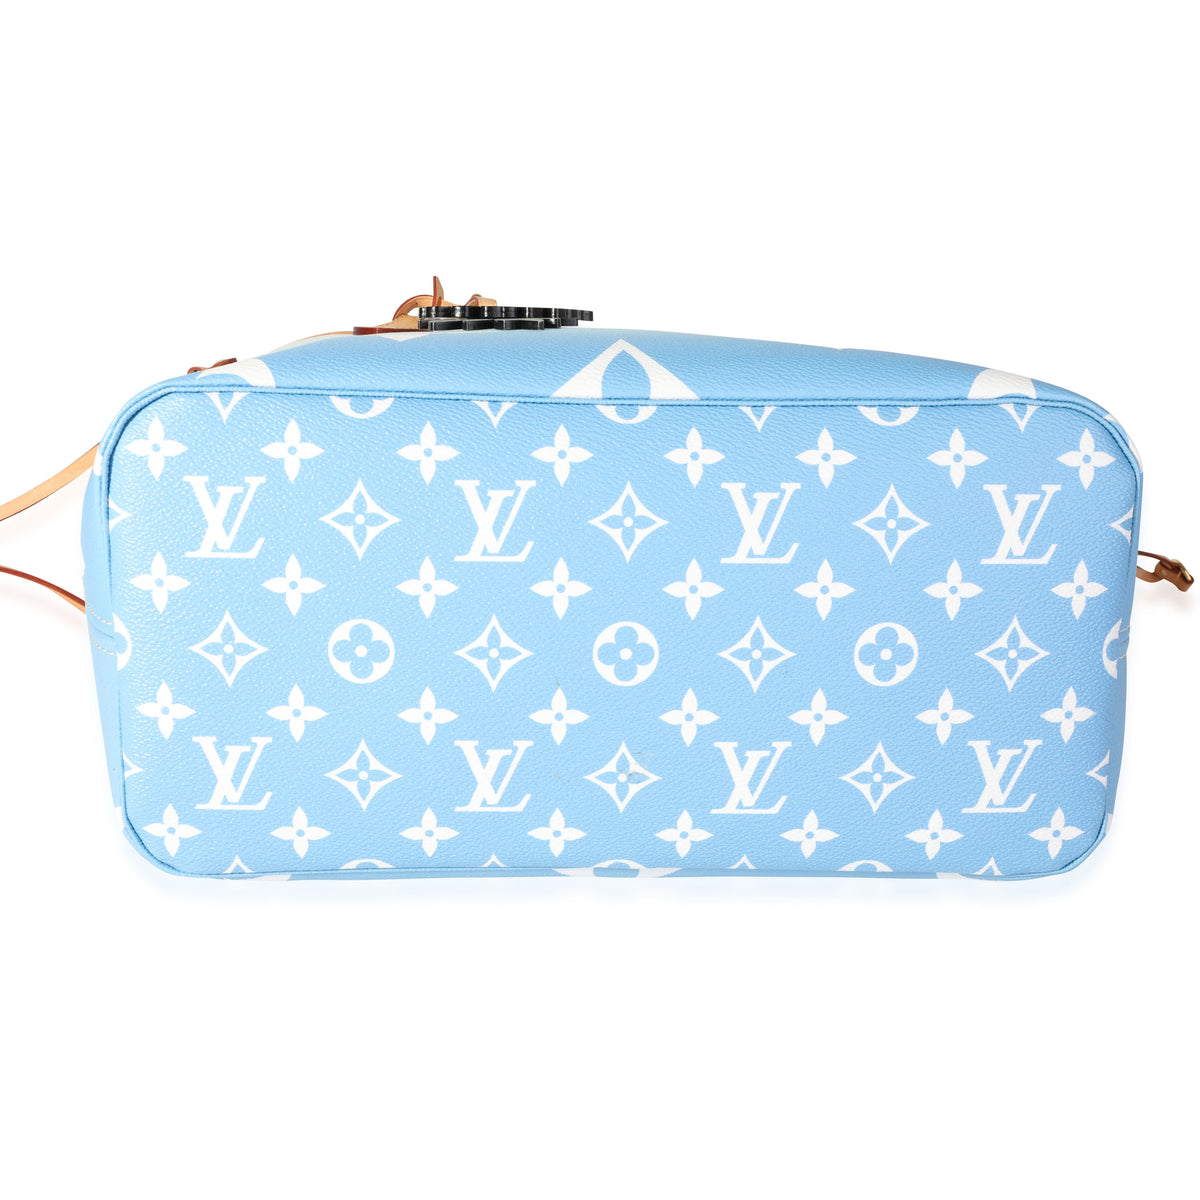 Louis Vuitton Blue & White Giant Monogram Canvas By The Pool Neverfull MM, myGemma